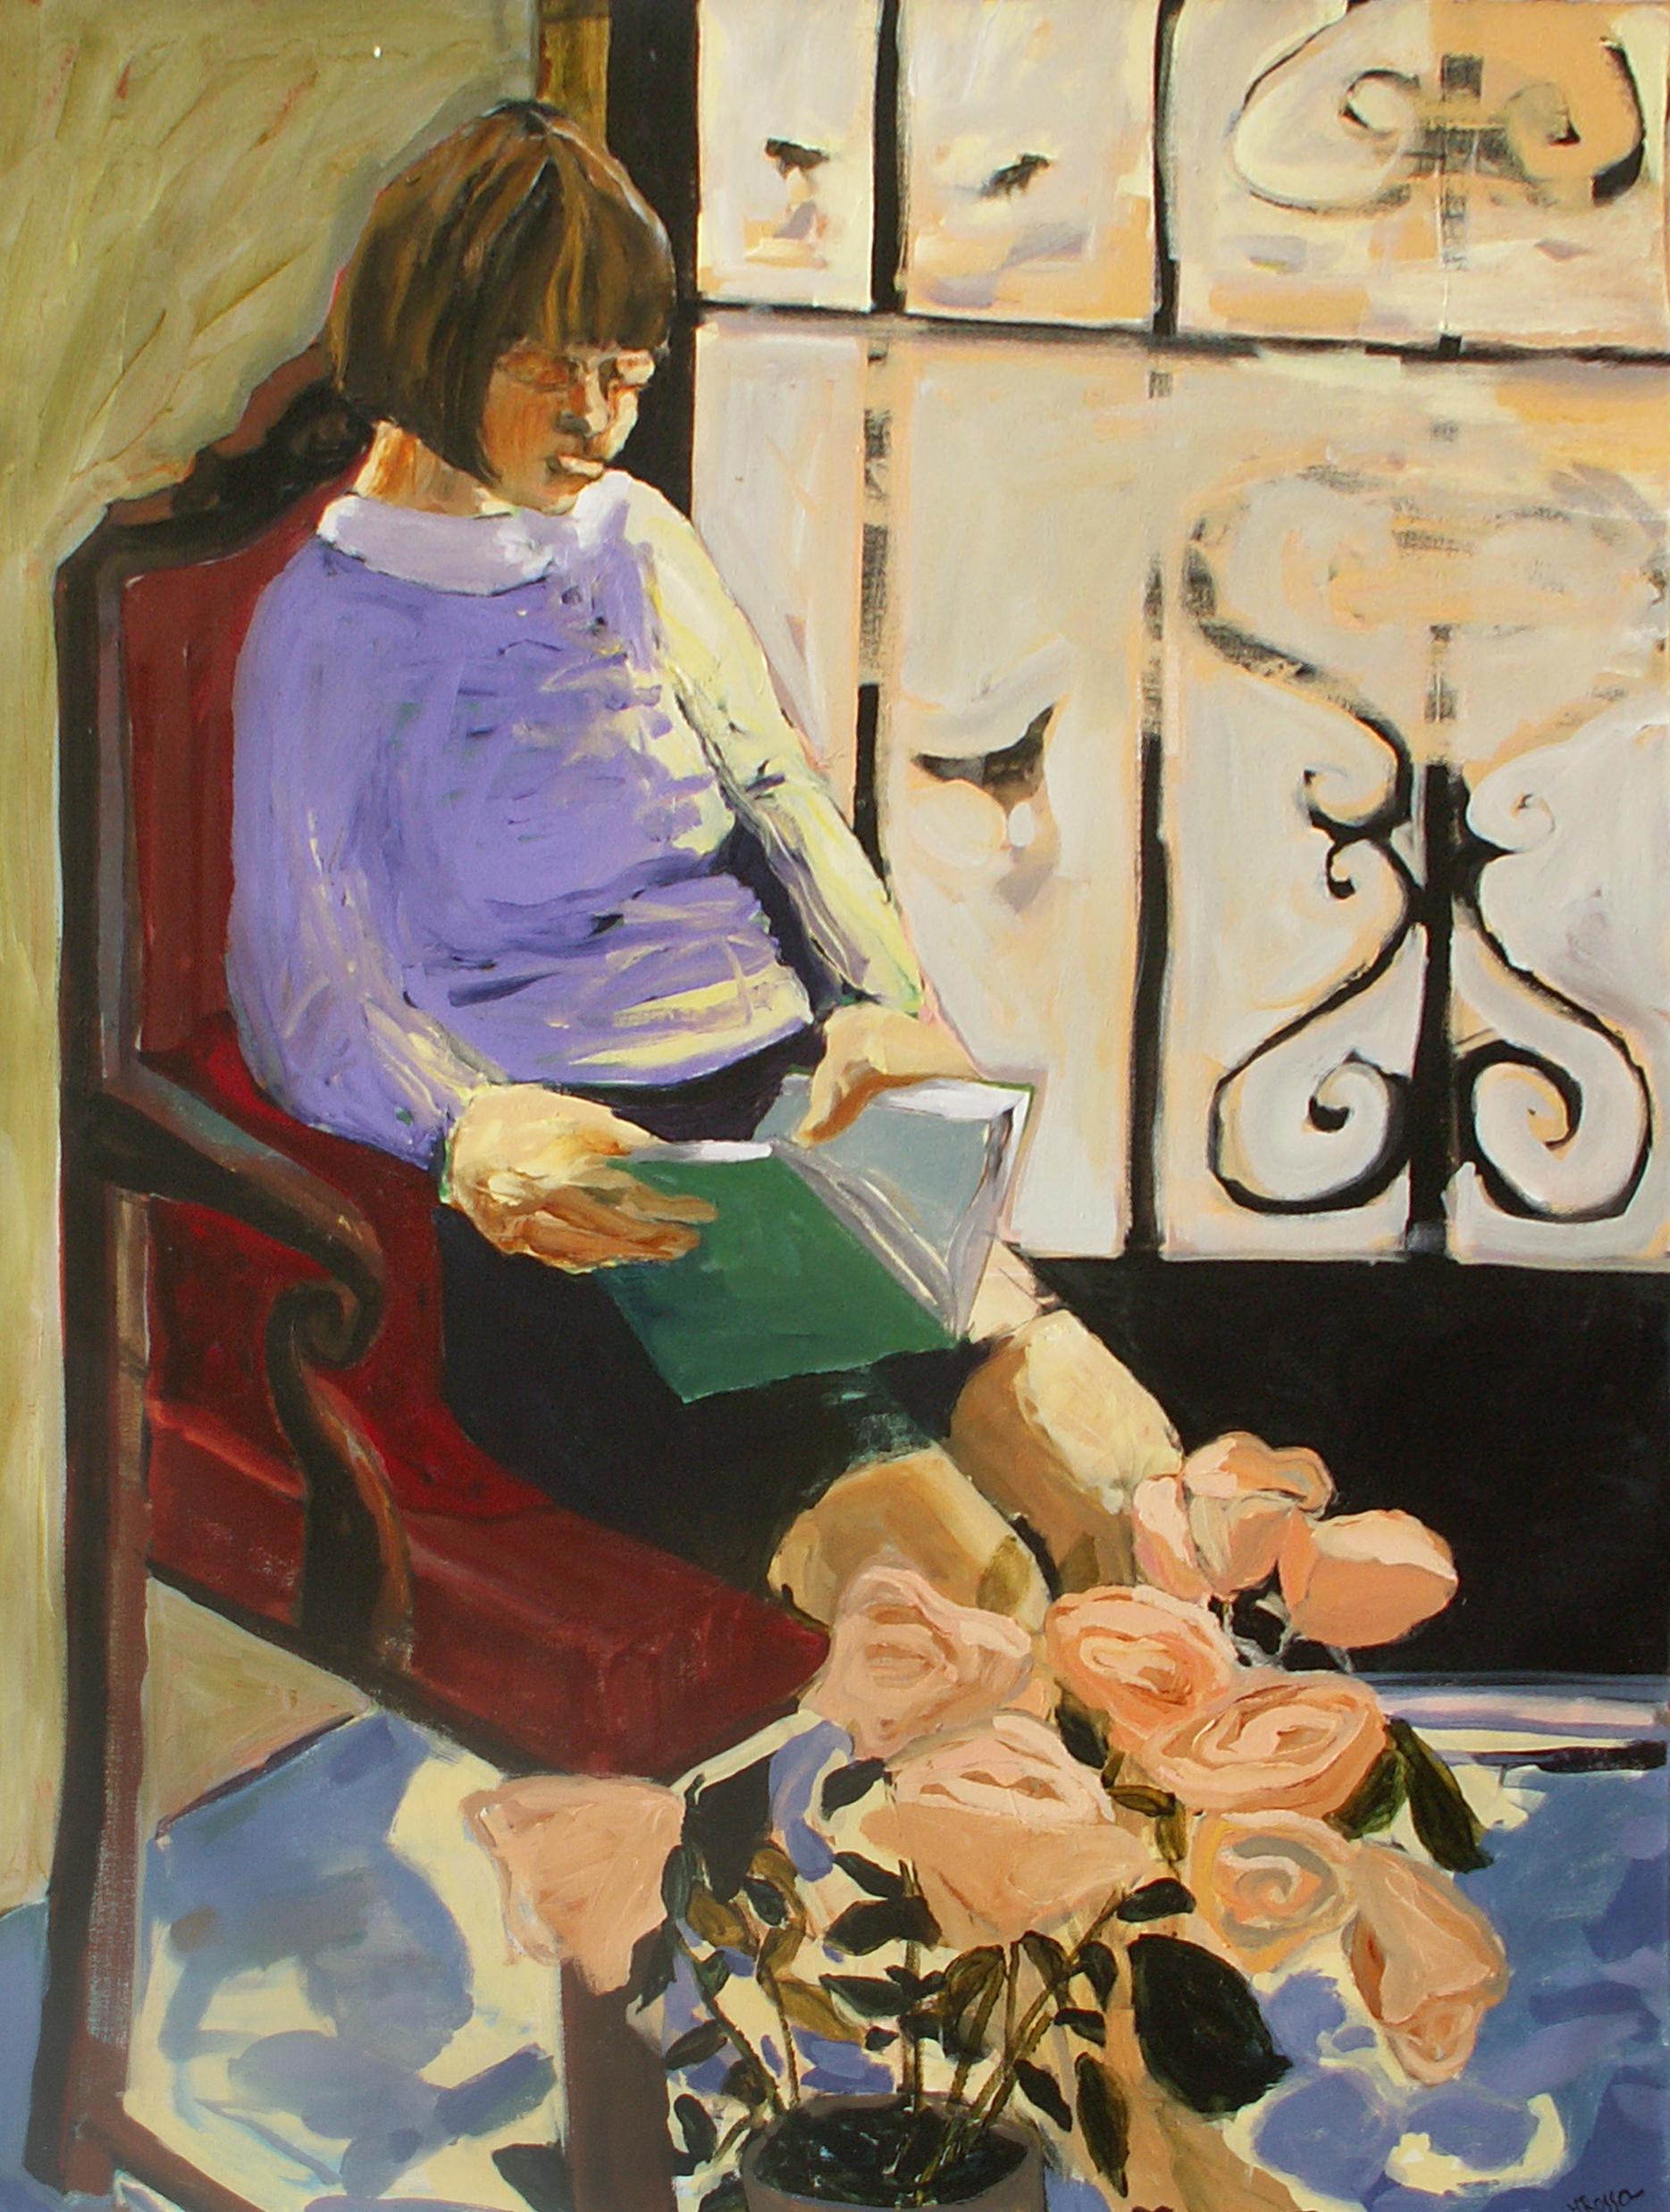 Monika Rossa Figurative Painting - A reading one - XXI century, Contemporary Figurative Oil Painting, Colorful